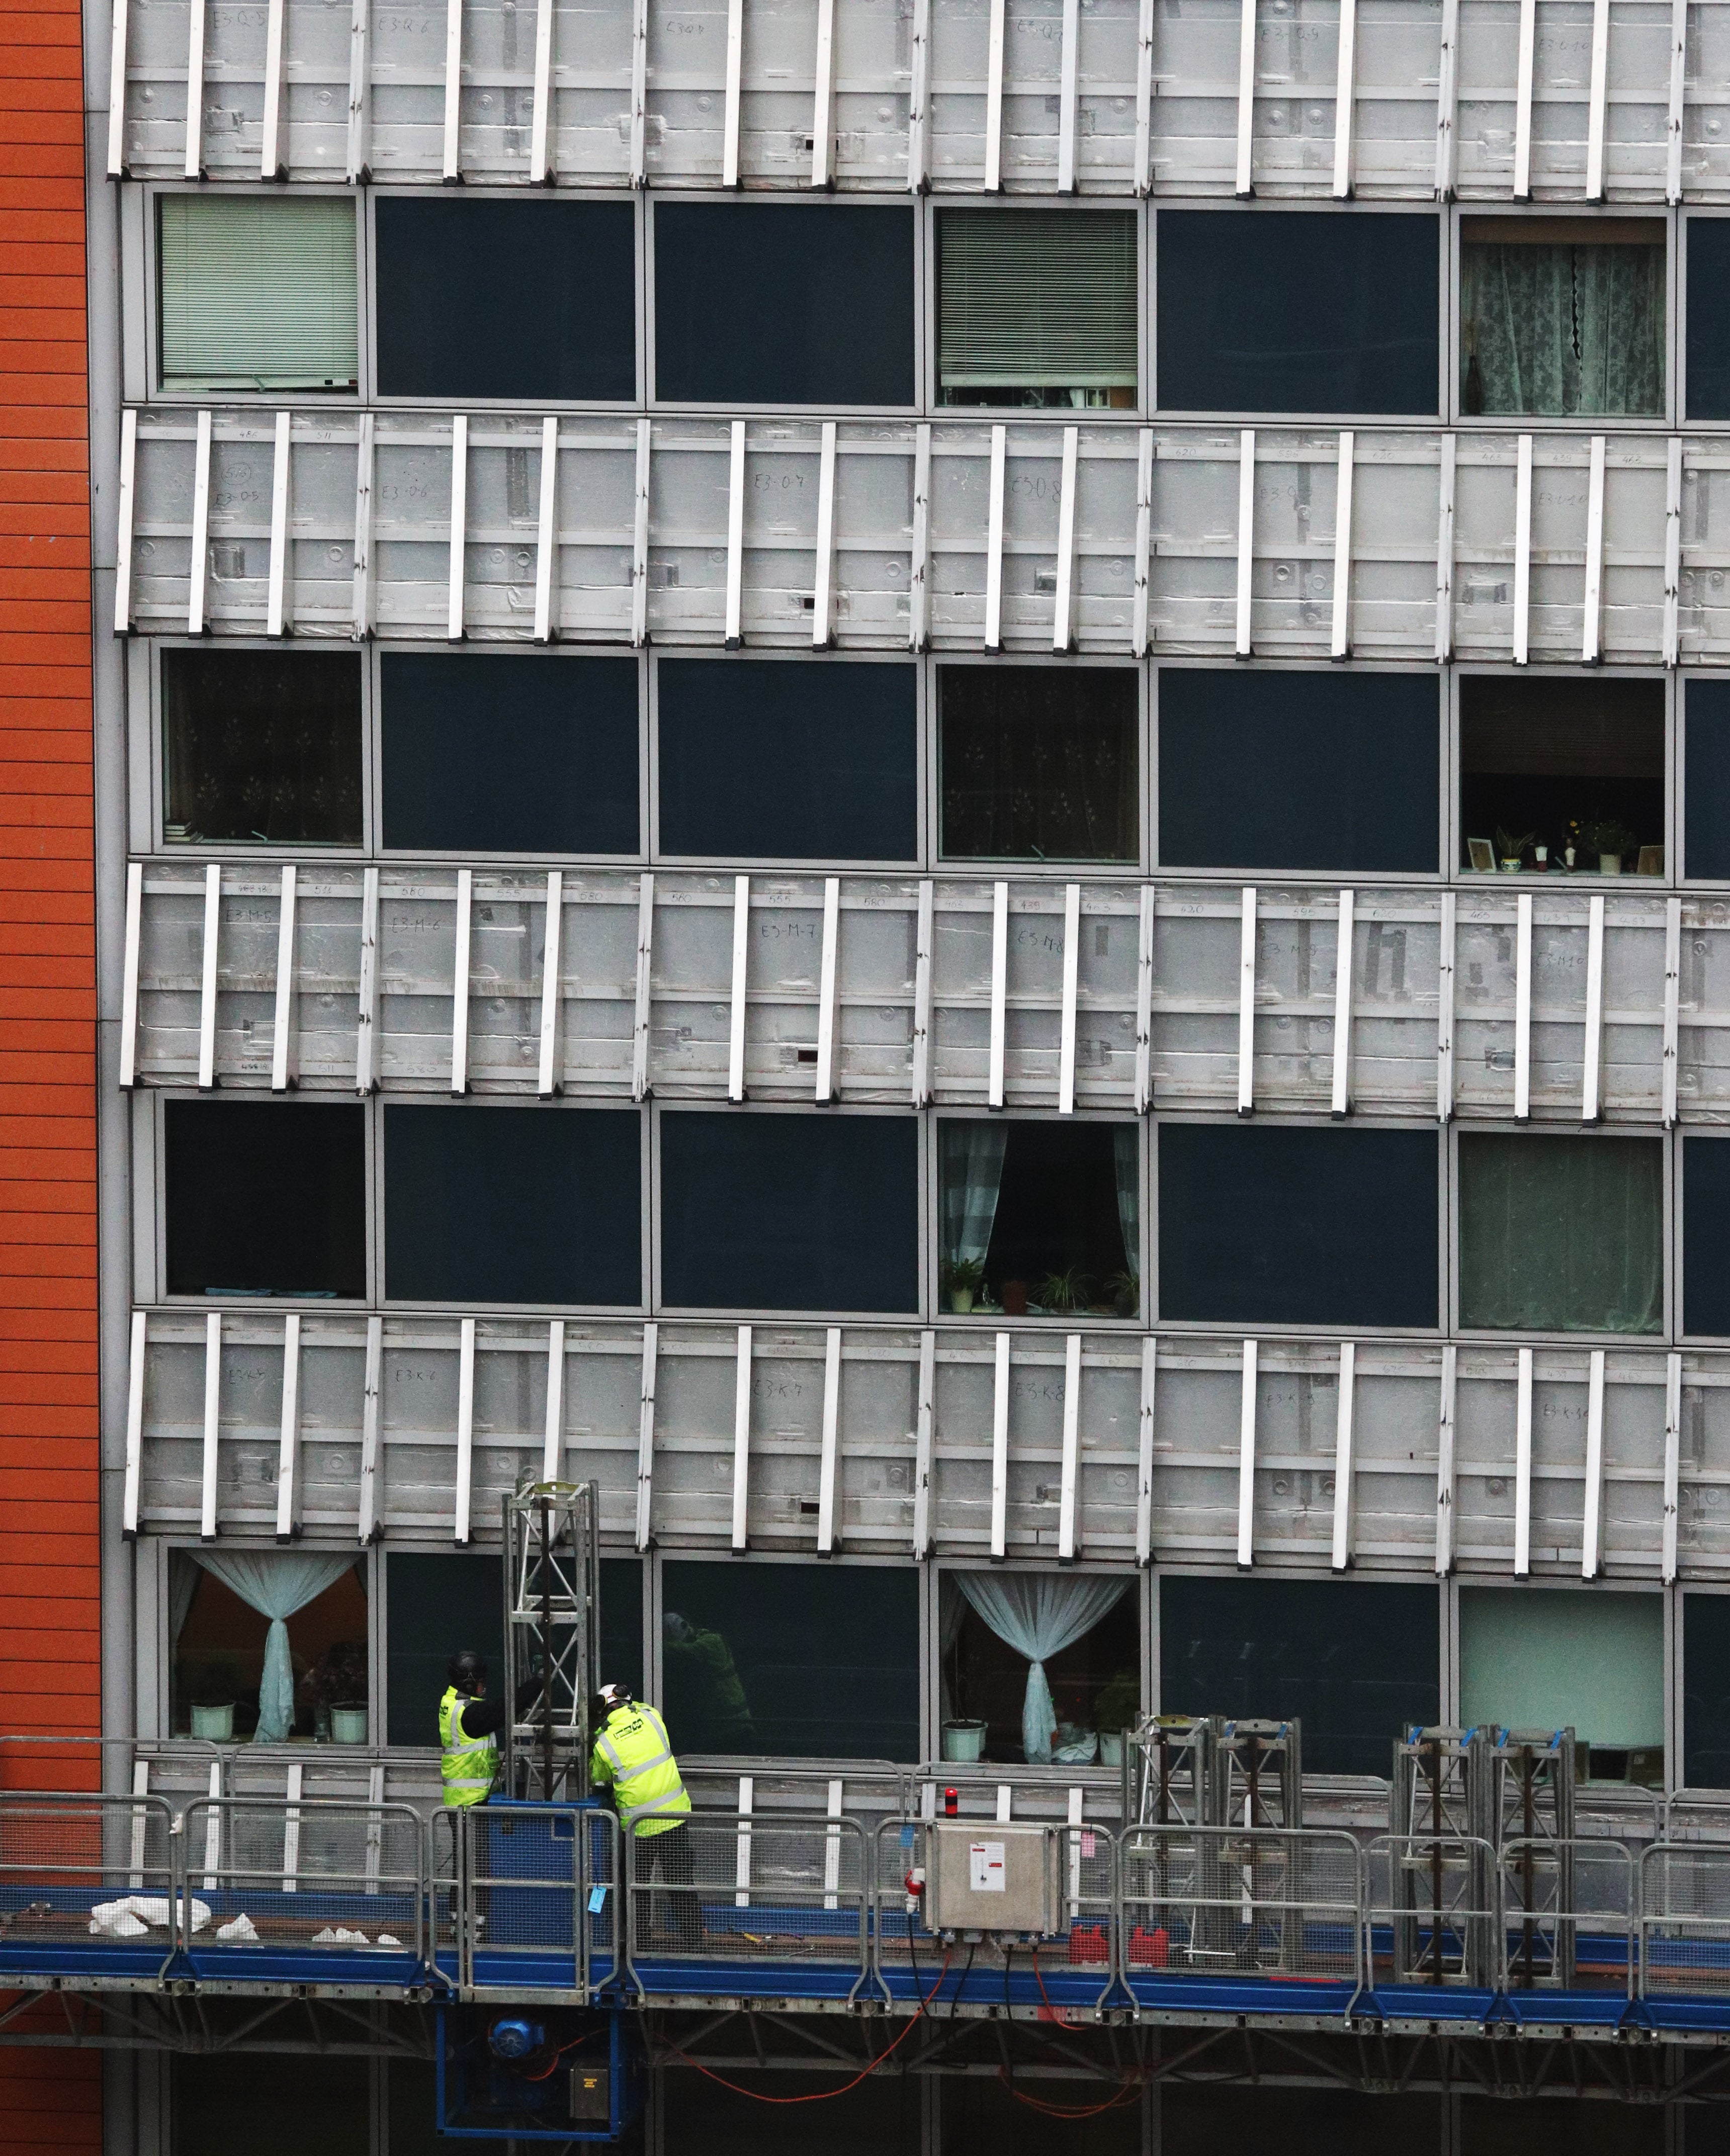 Housebuilder Crest Nicholson has revealed another hit of up to £120m after signing up to the Government’s new Building Safety Pledge in the wake of the Grenfell Tower tragedy (Jonathan Brady/PA)